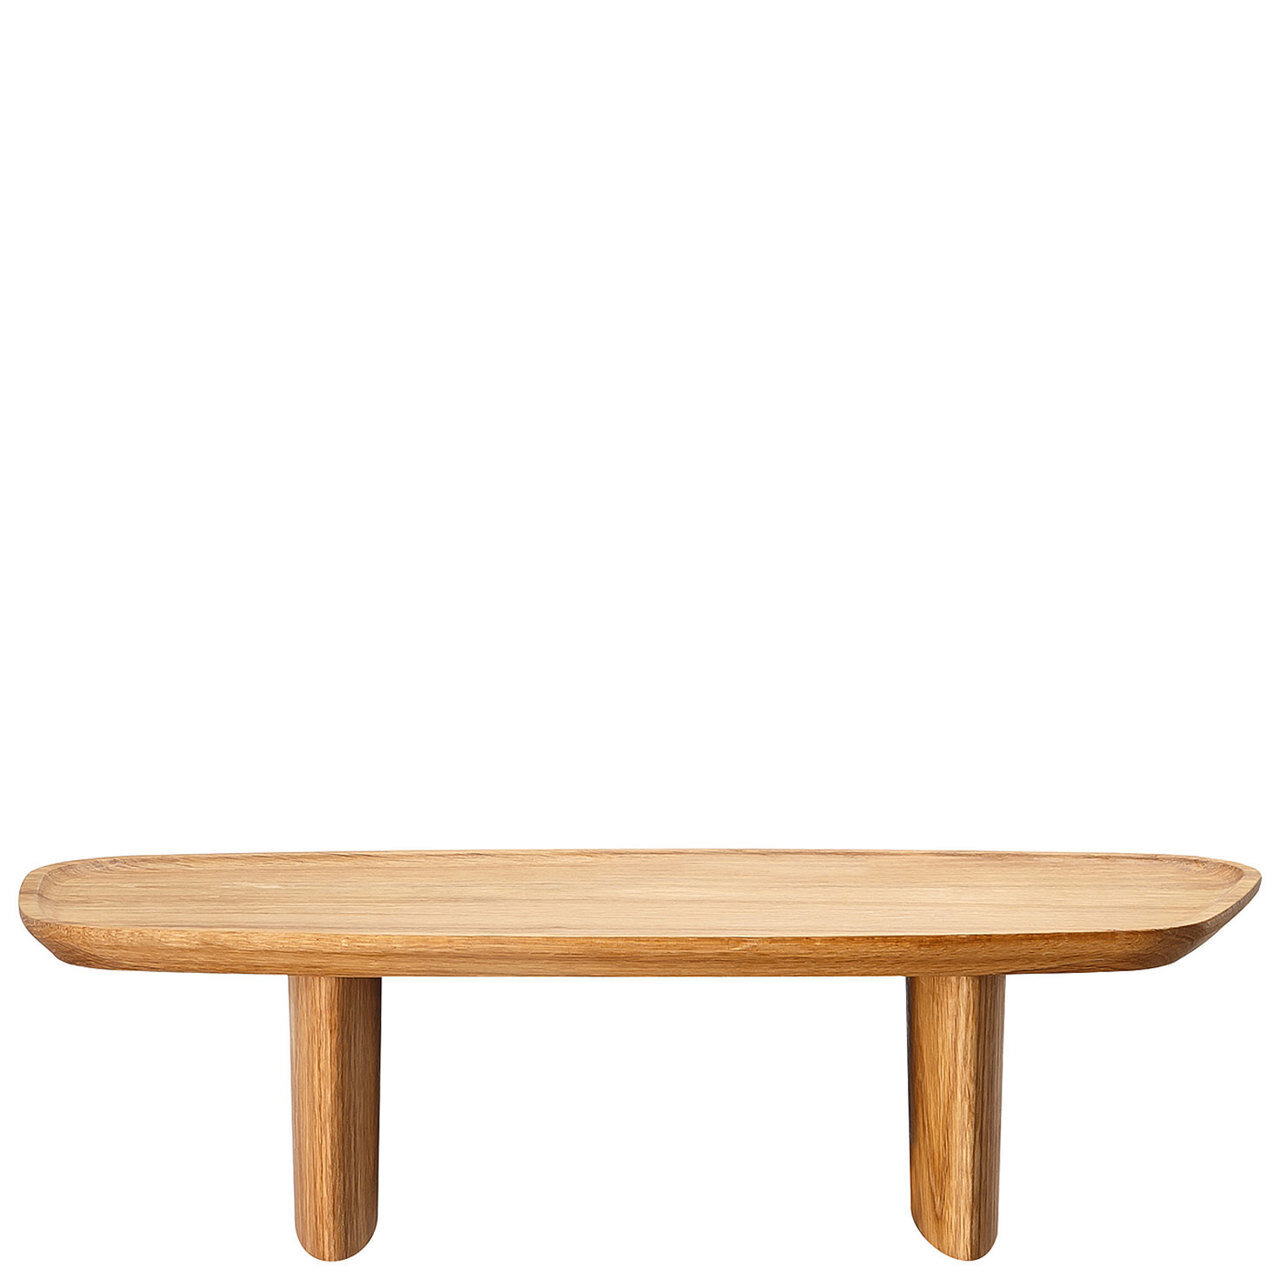 Rosenthal Junto Footed Wood Tray 15 3/4 x 7 Inch